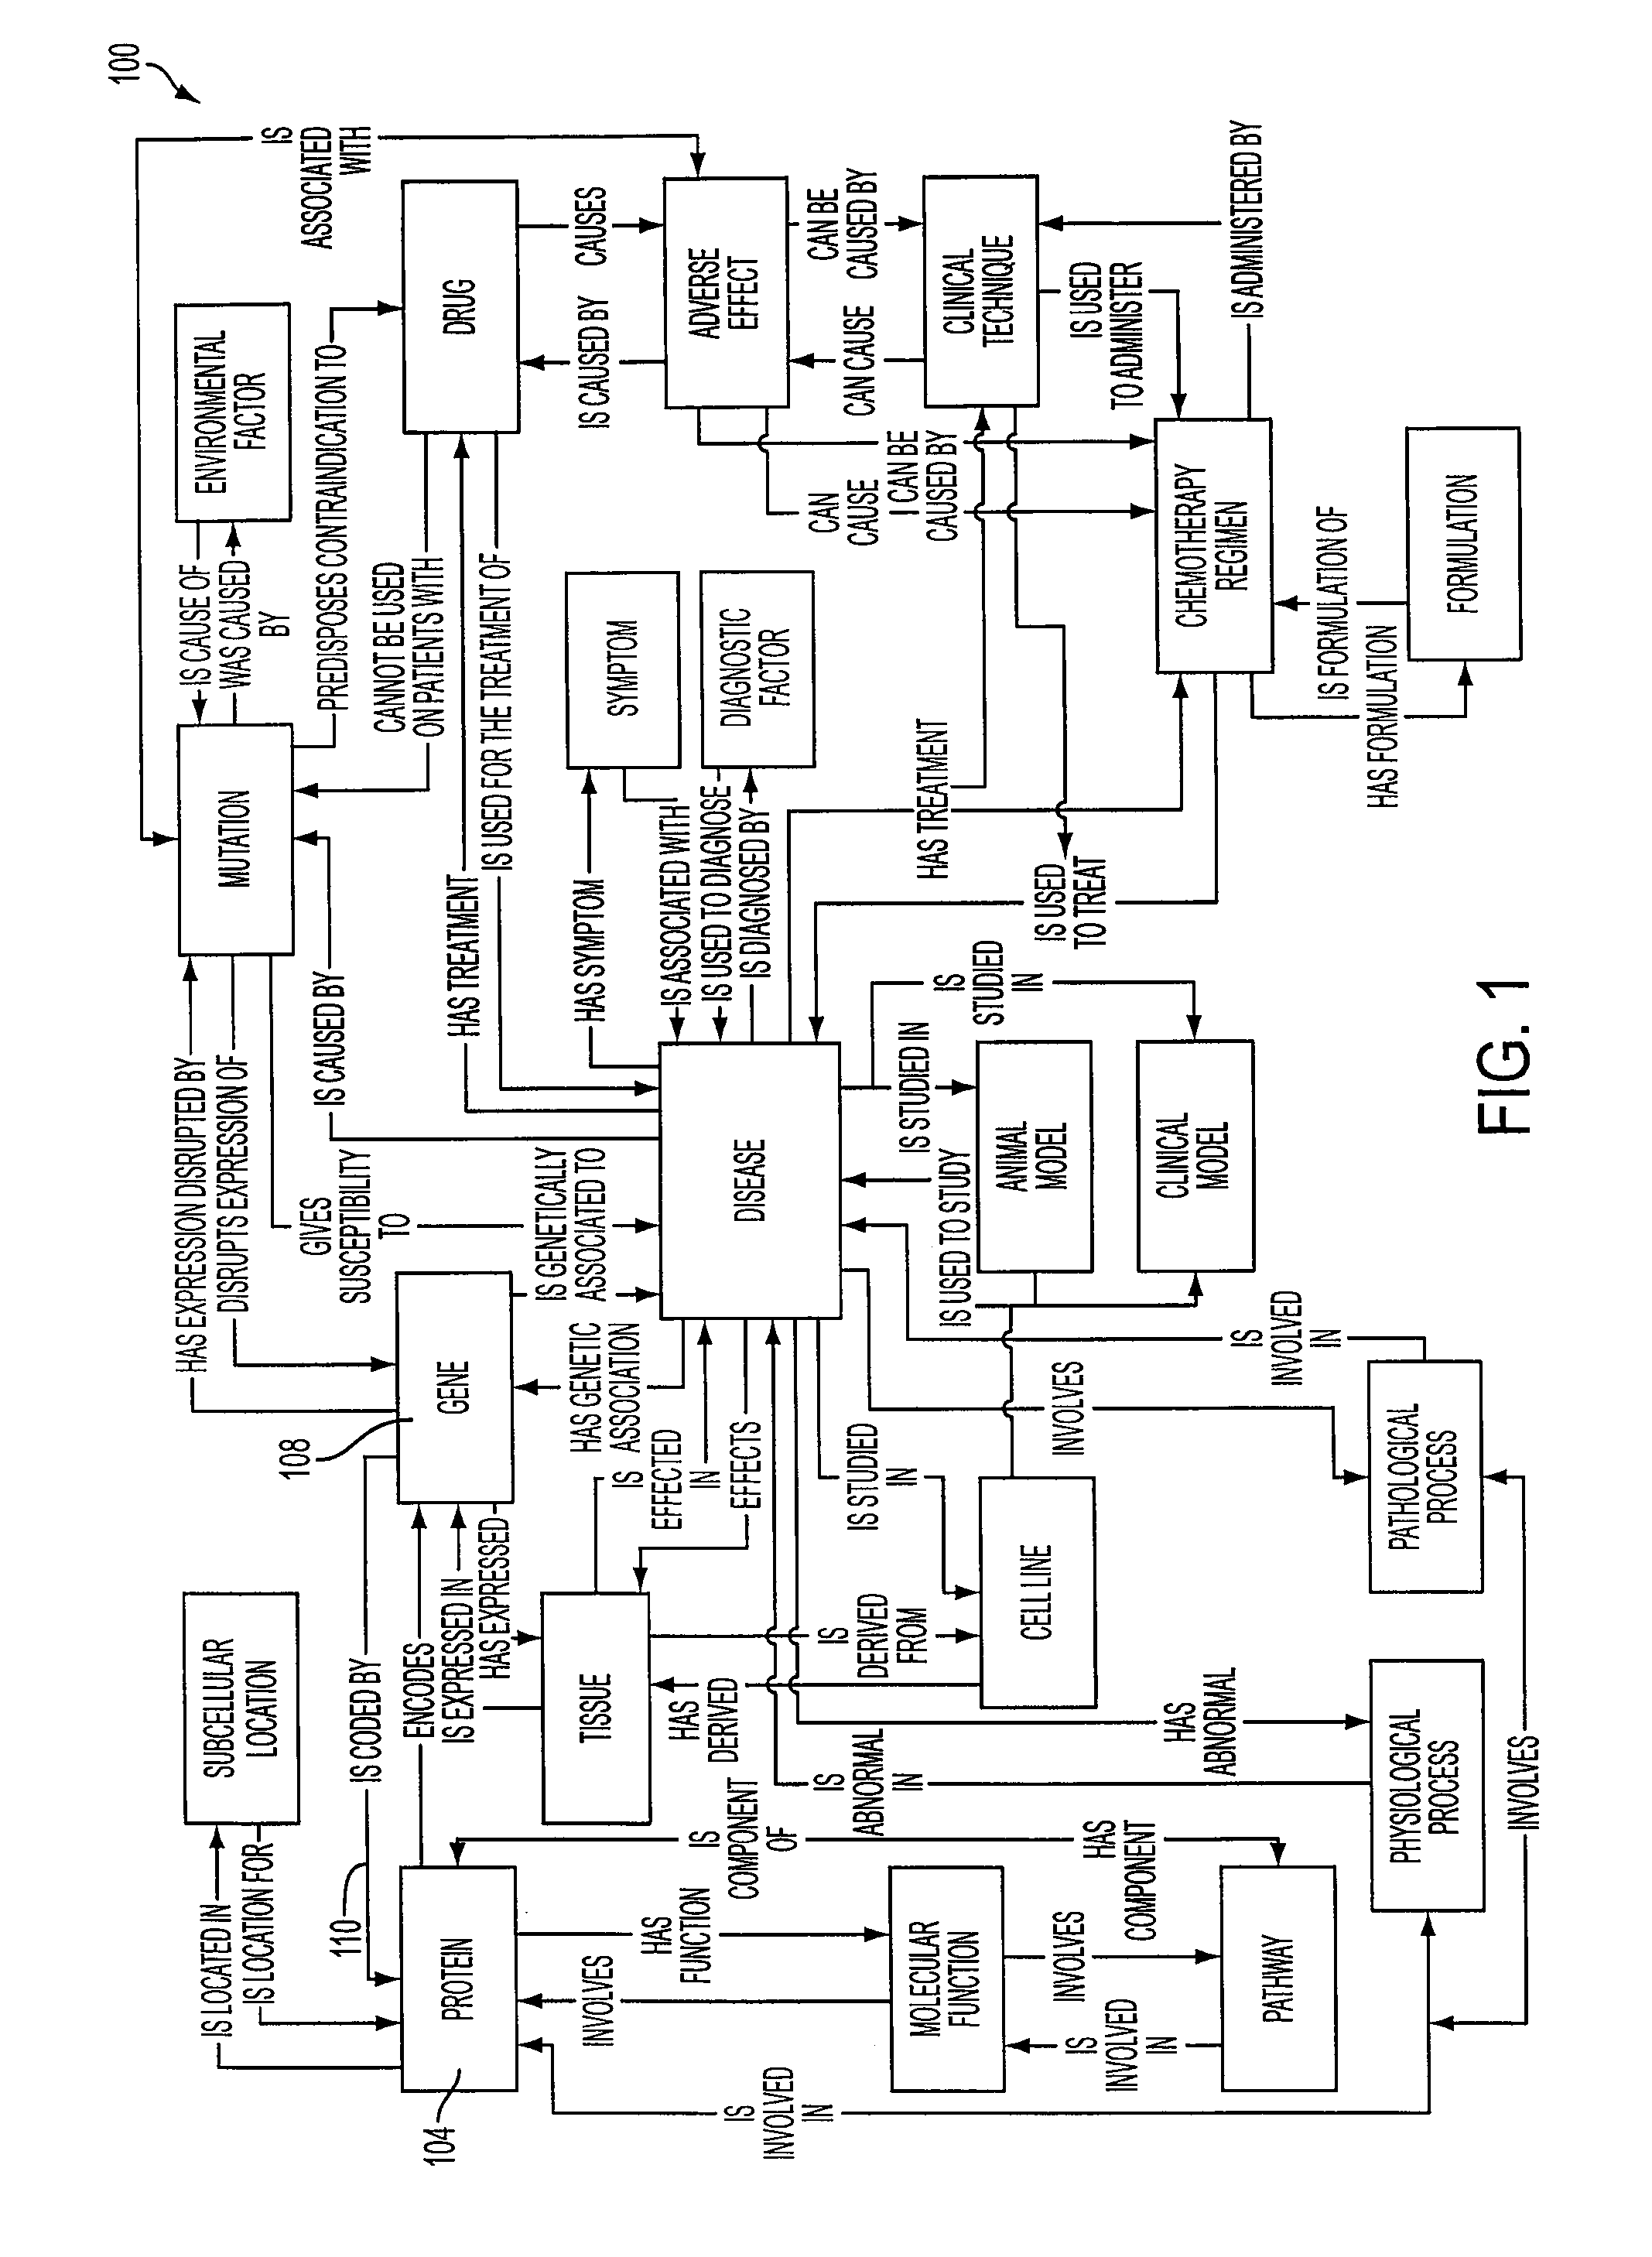 Creating a multi-relational ontology having a predetermined structure